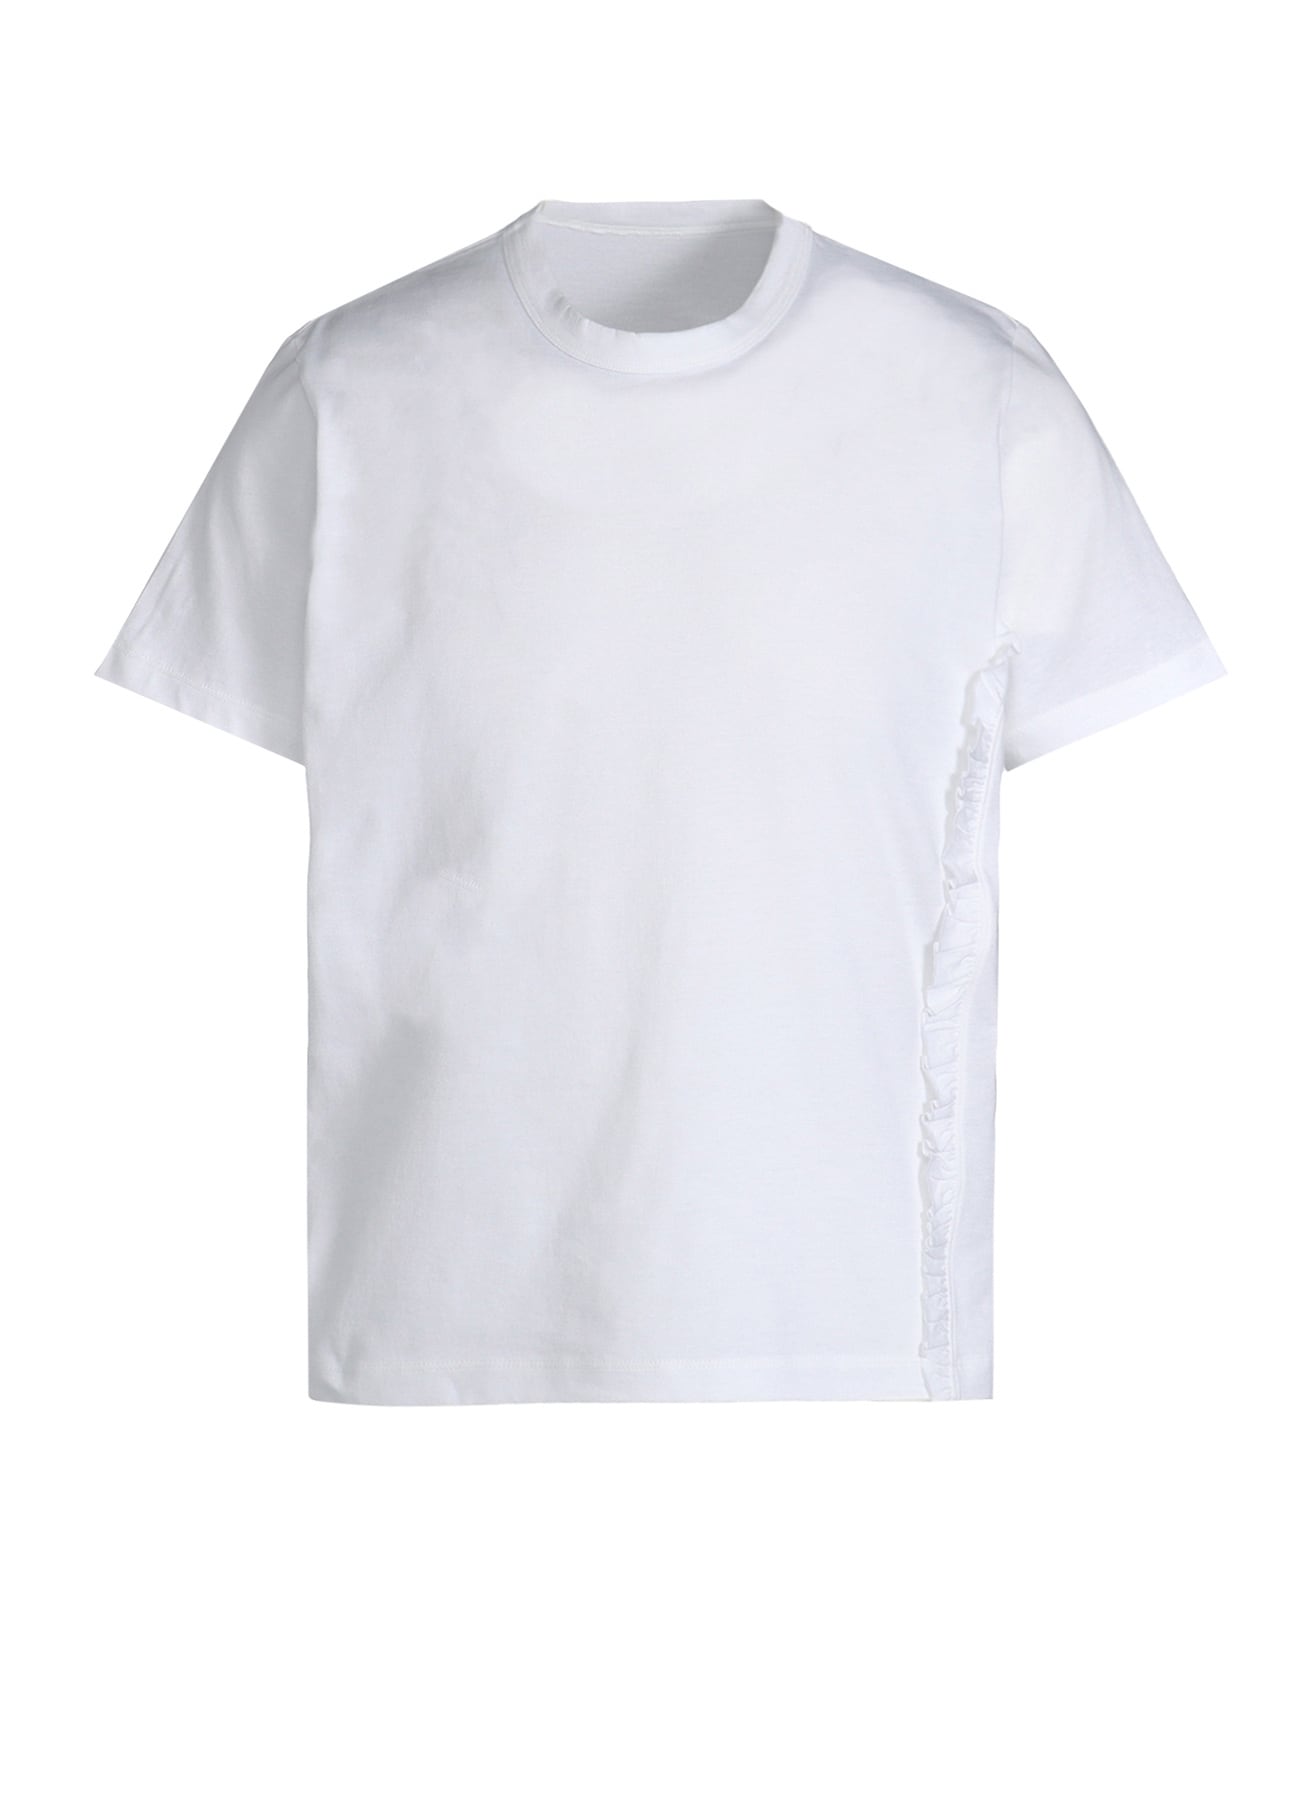 COTTON JERSEY FRILL T-SHIRTS(FREE SIZE White): Y's for living｜THE 